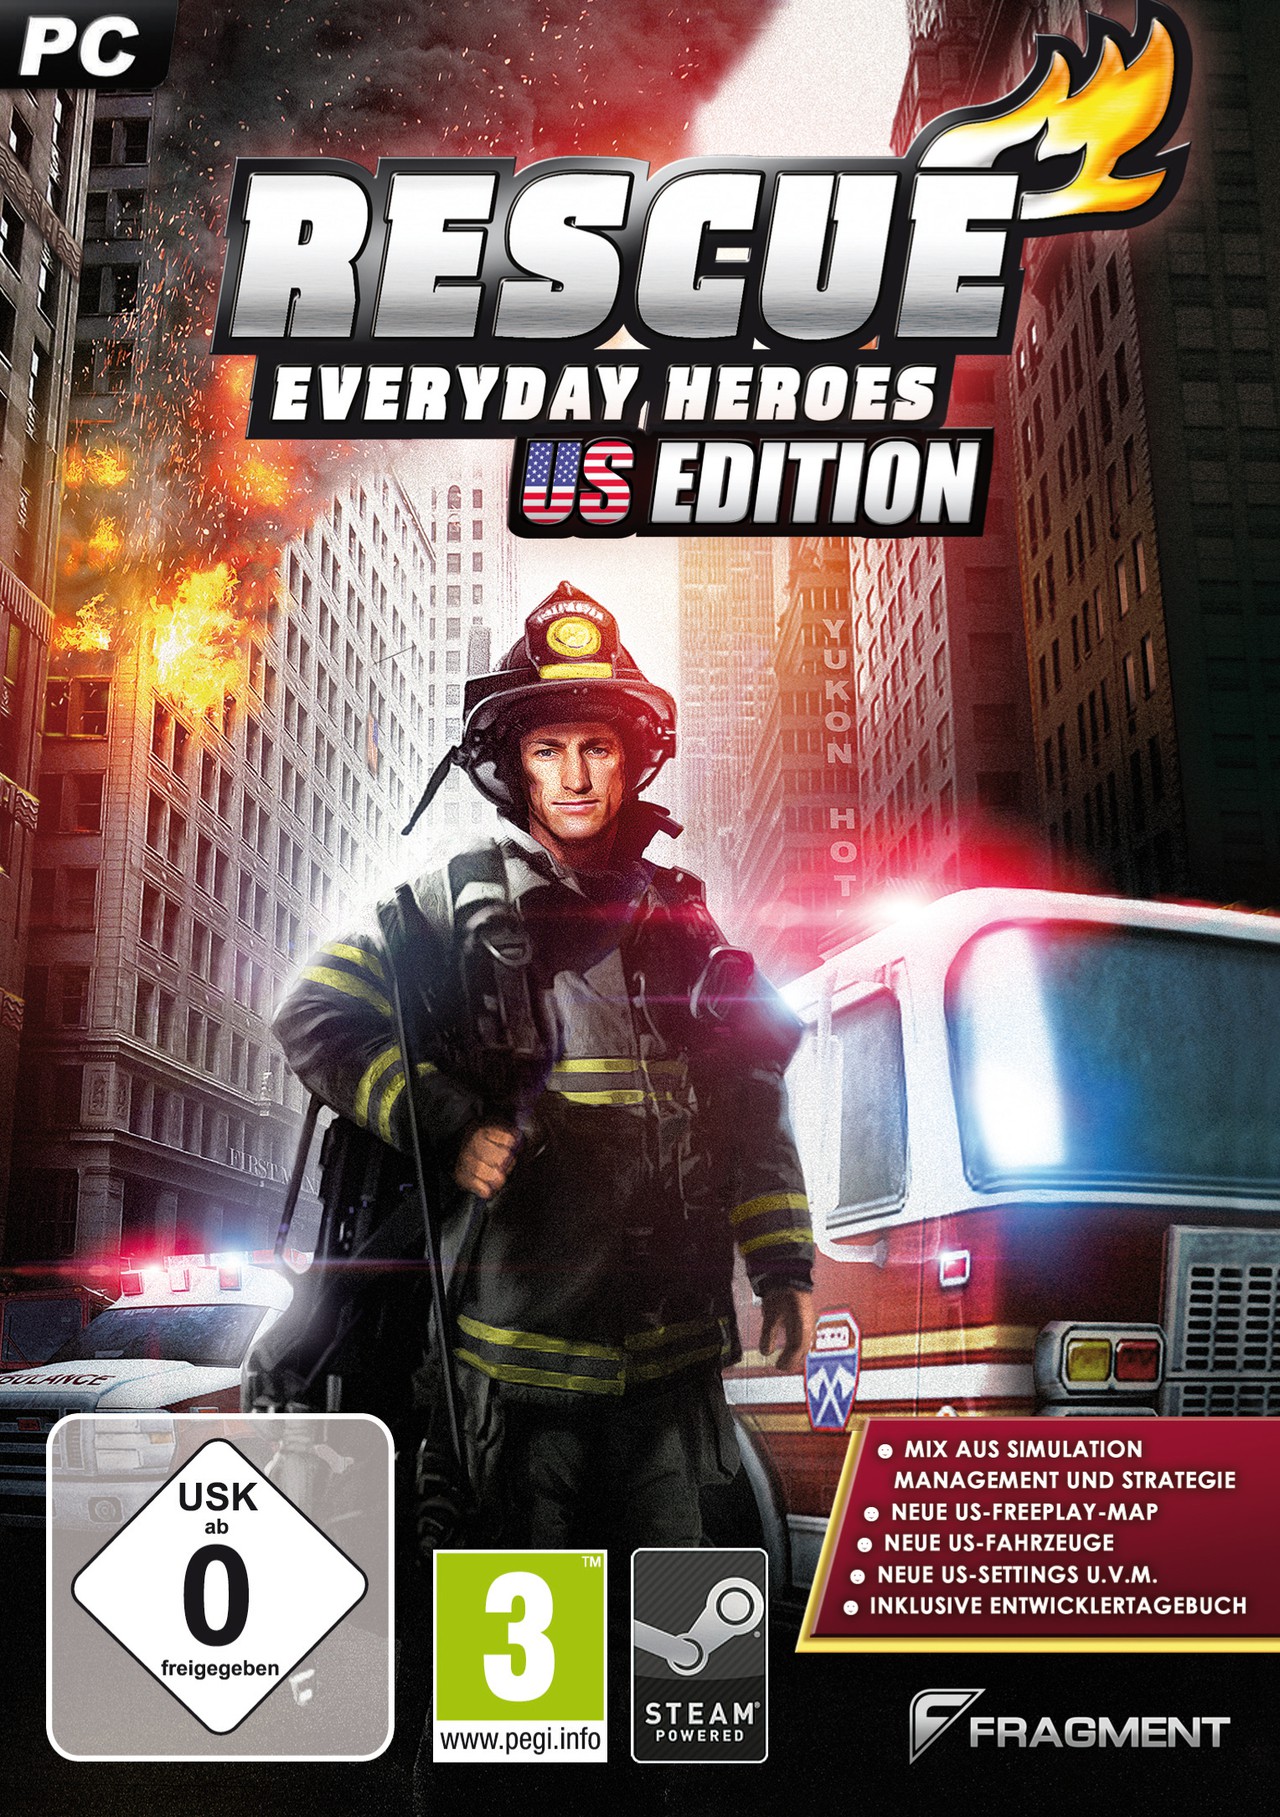 Rescue: Everyday Heroes | Video Game Reviews and Previews PC, PS4, Xbox One and mobile